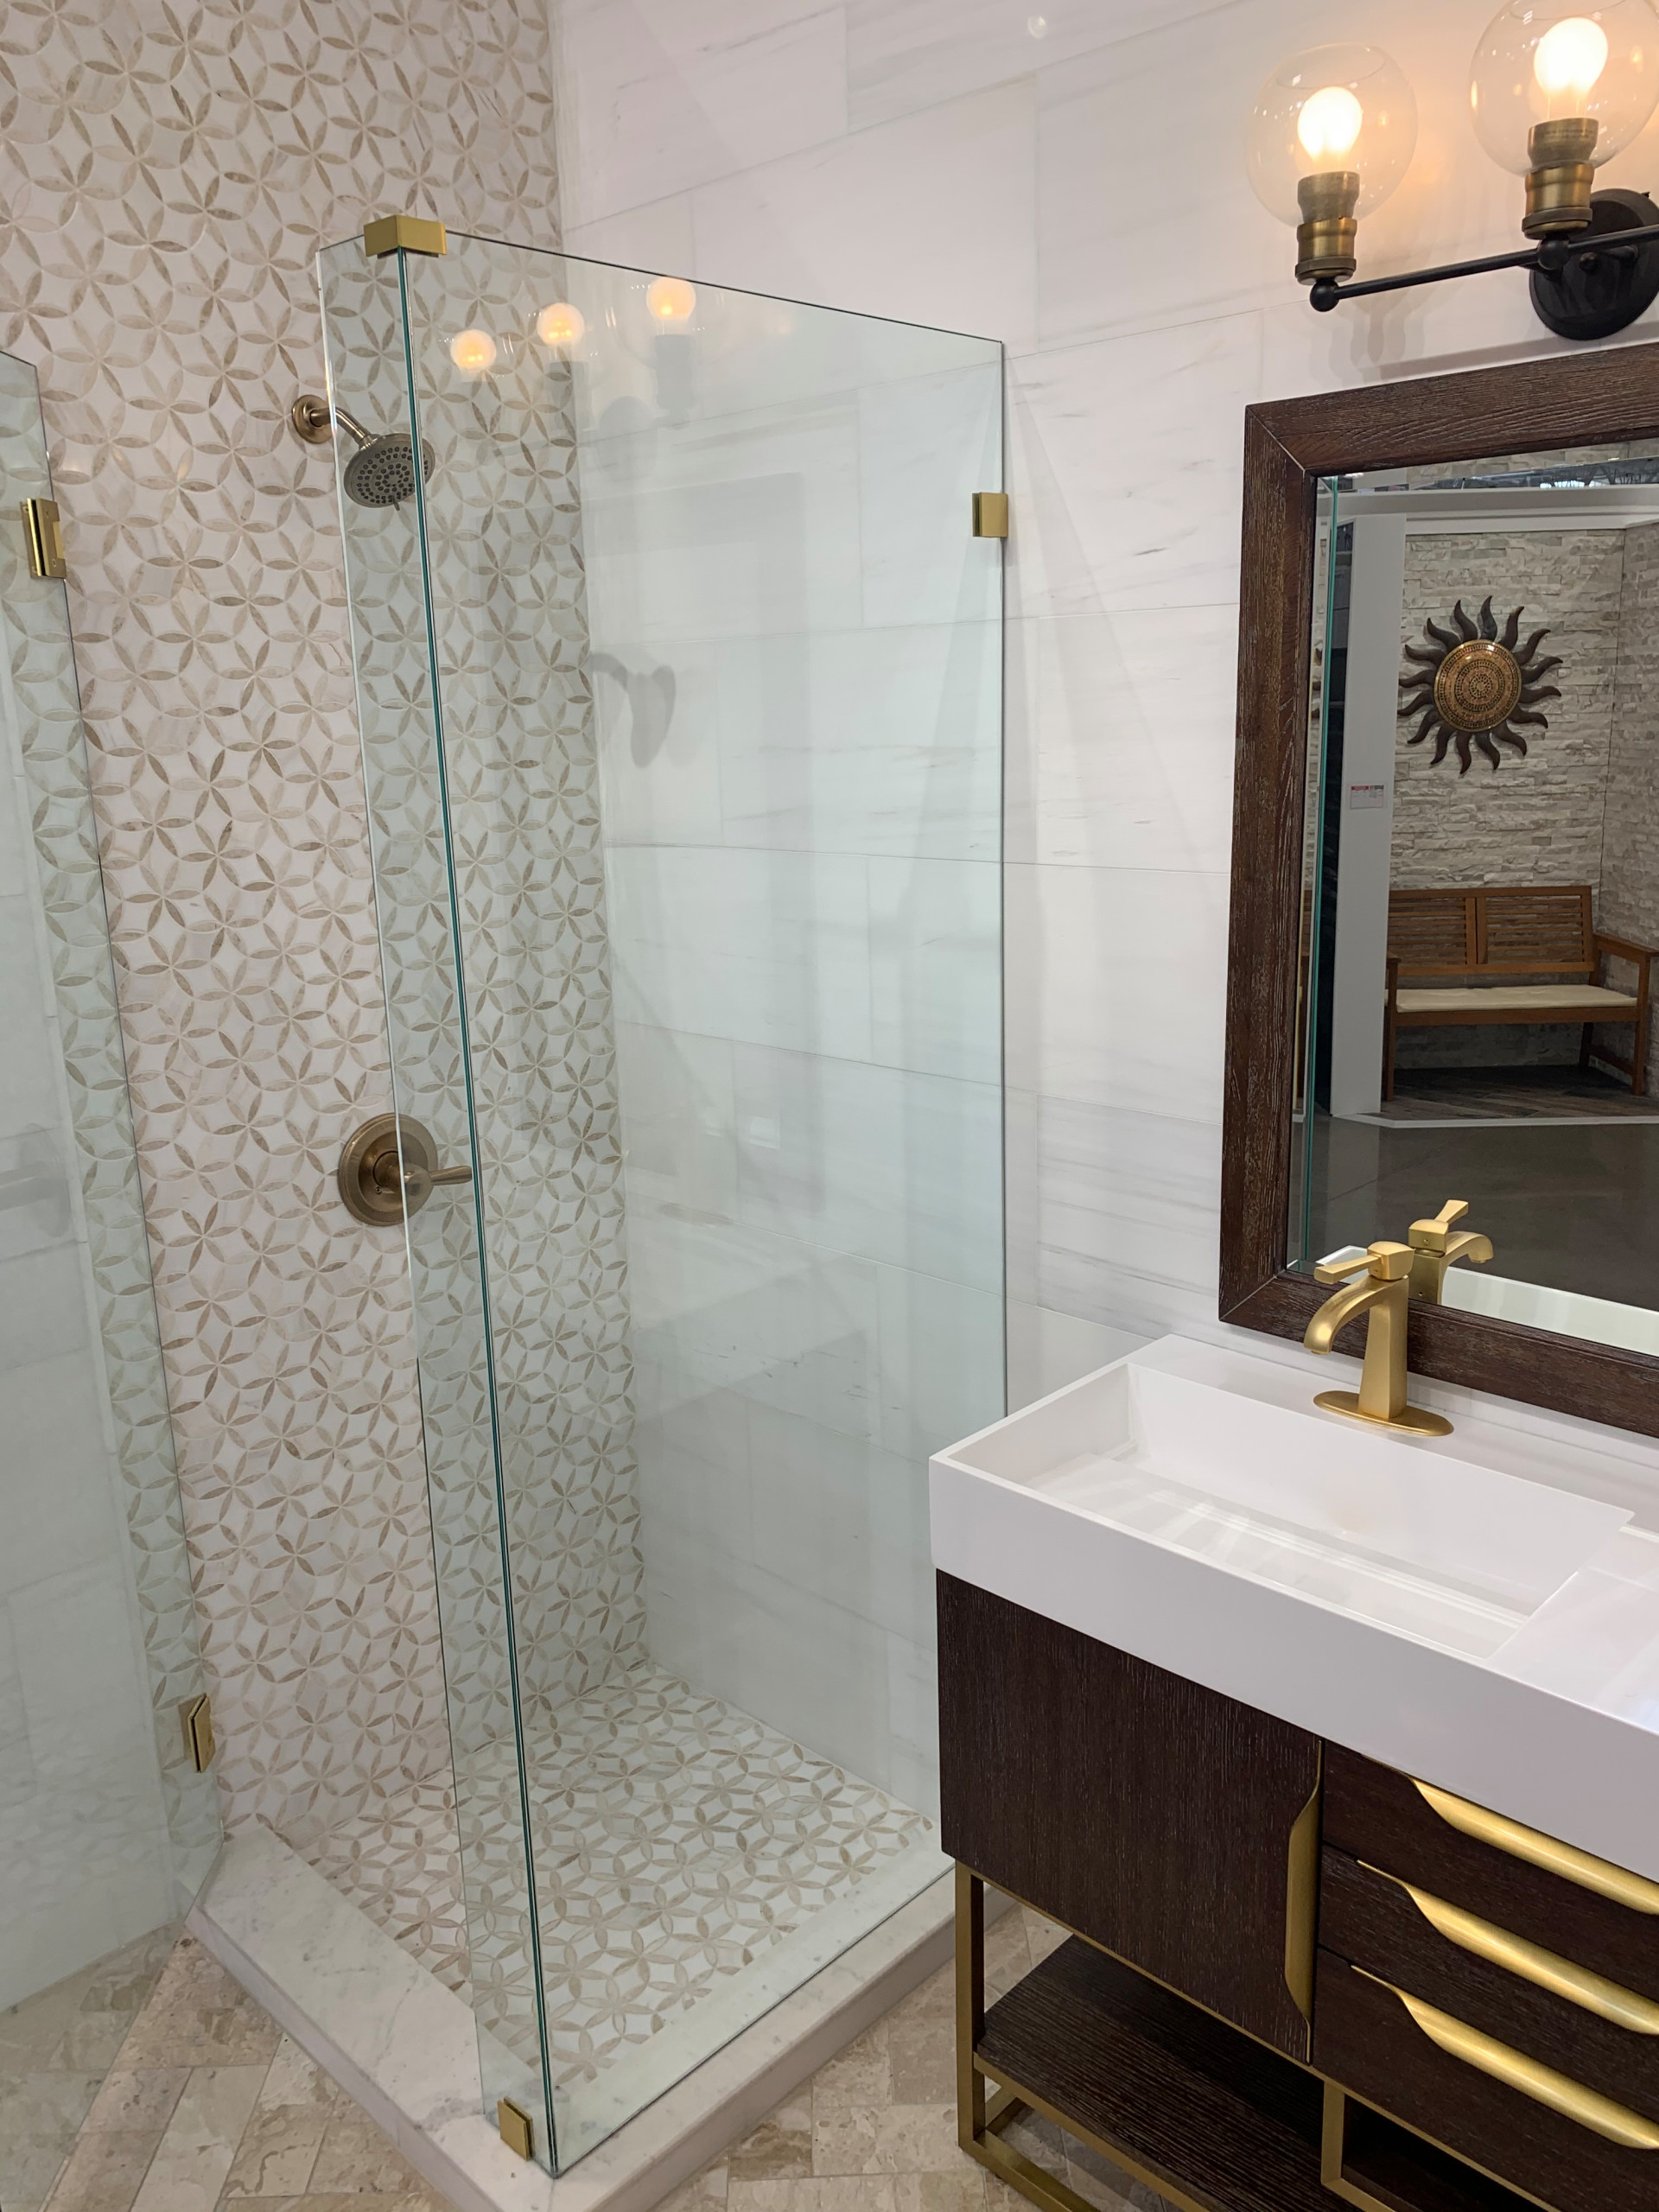 SMALL SHOWER & BOLD TILE CREATE A LARGE ELEGANT LOOK!